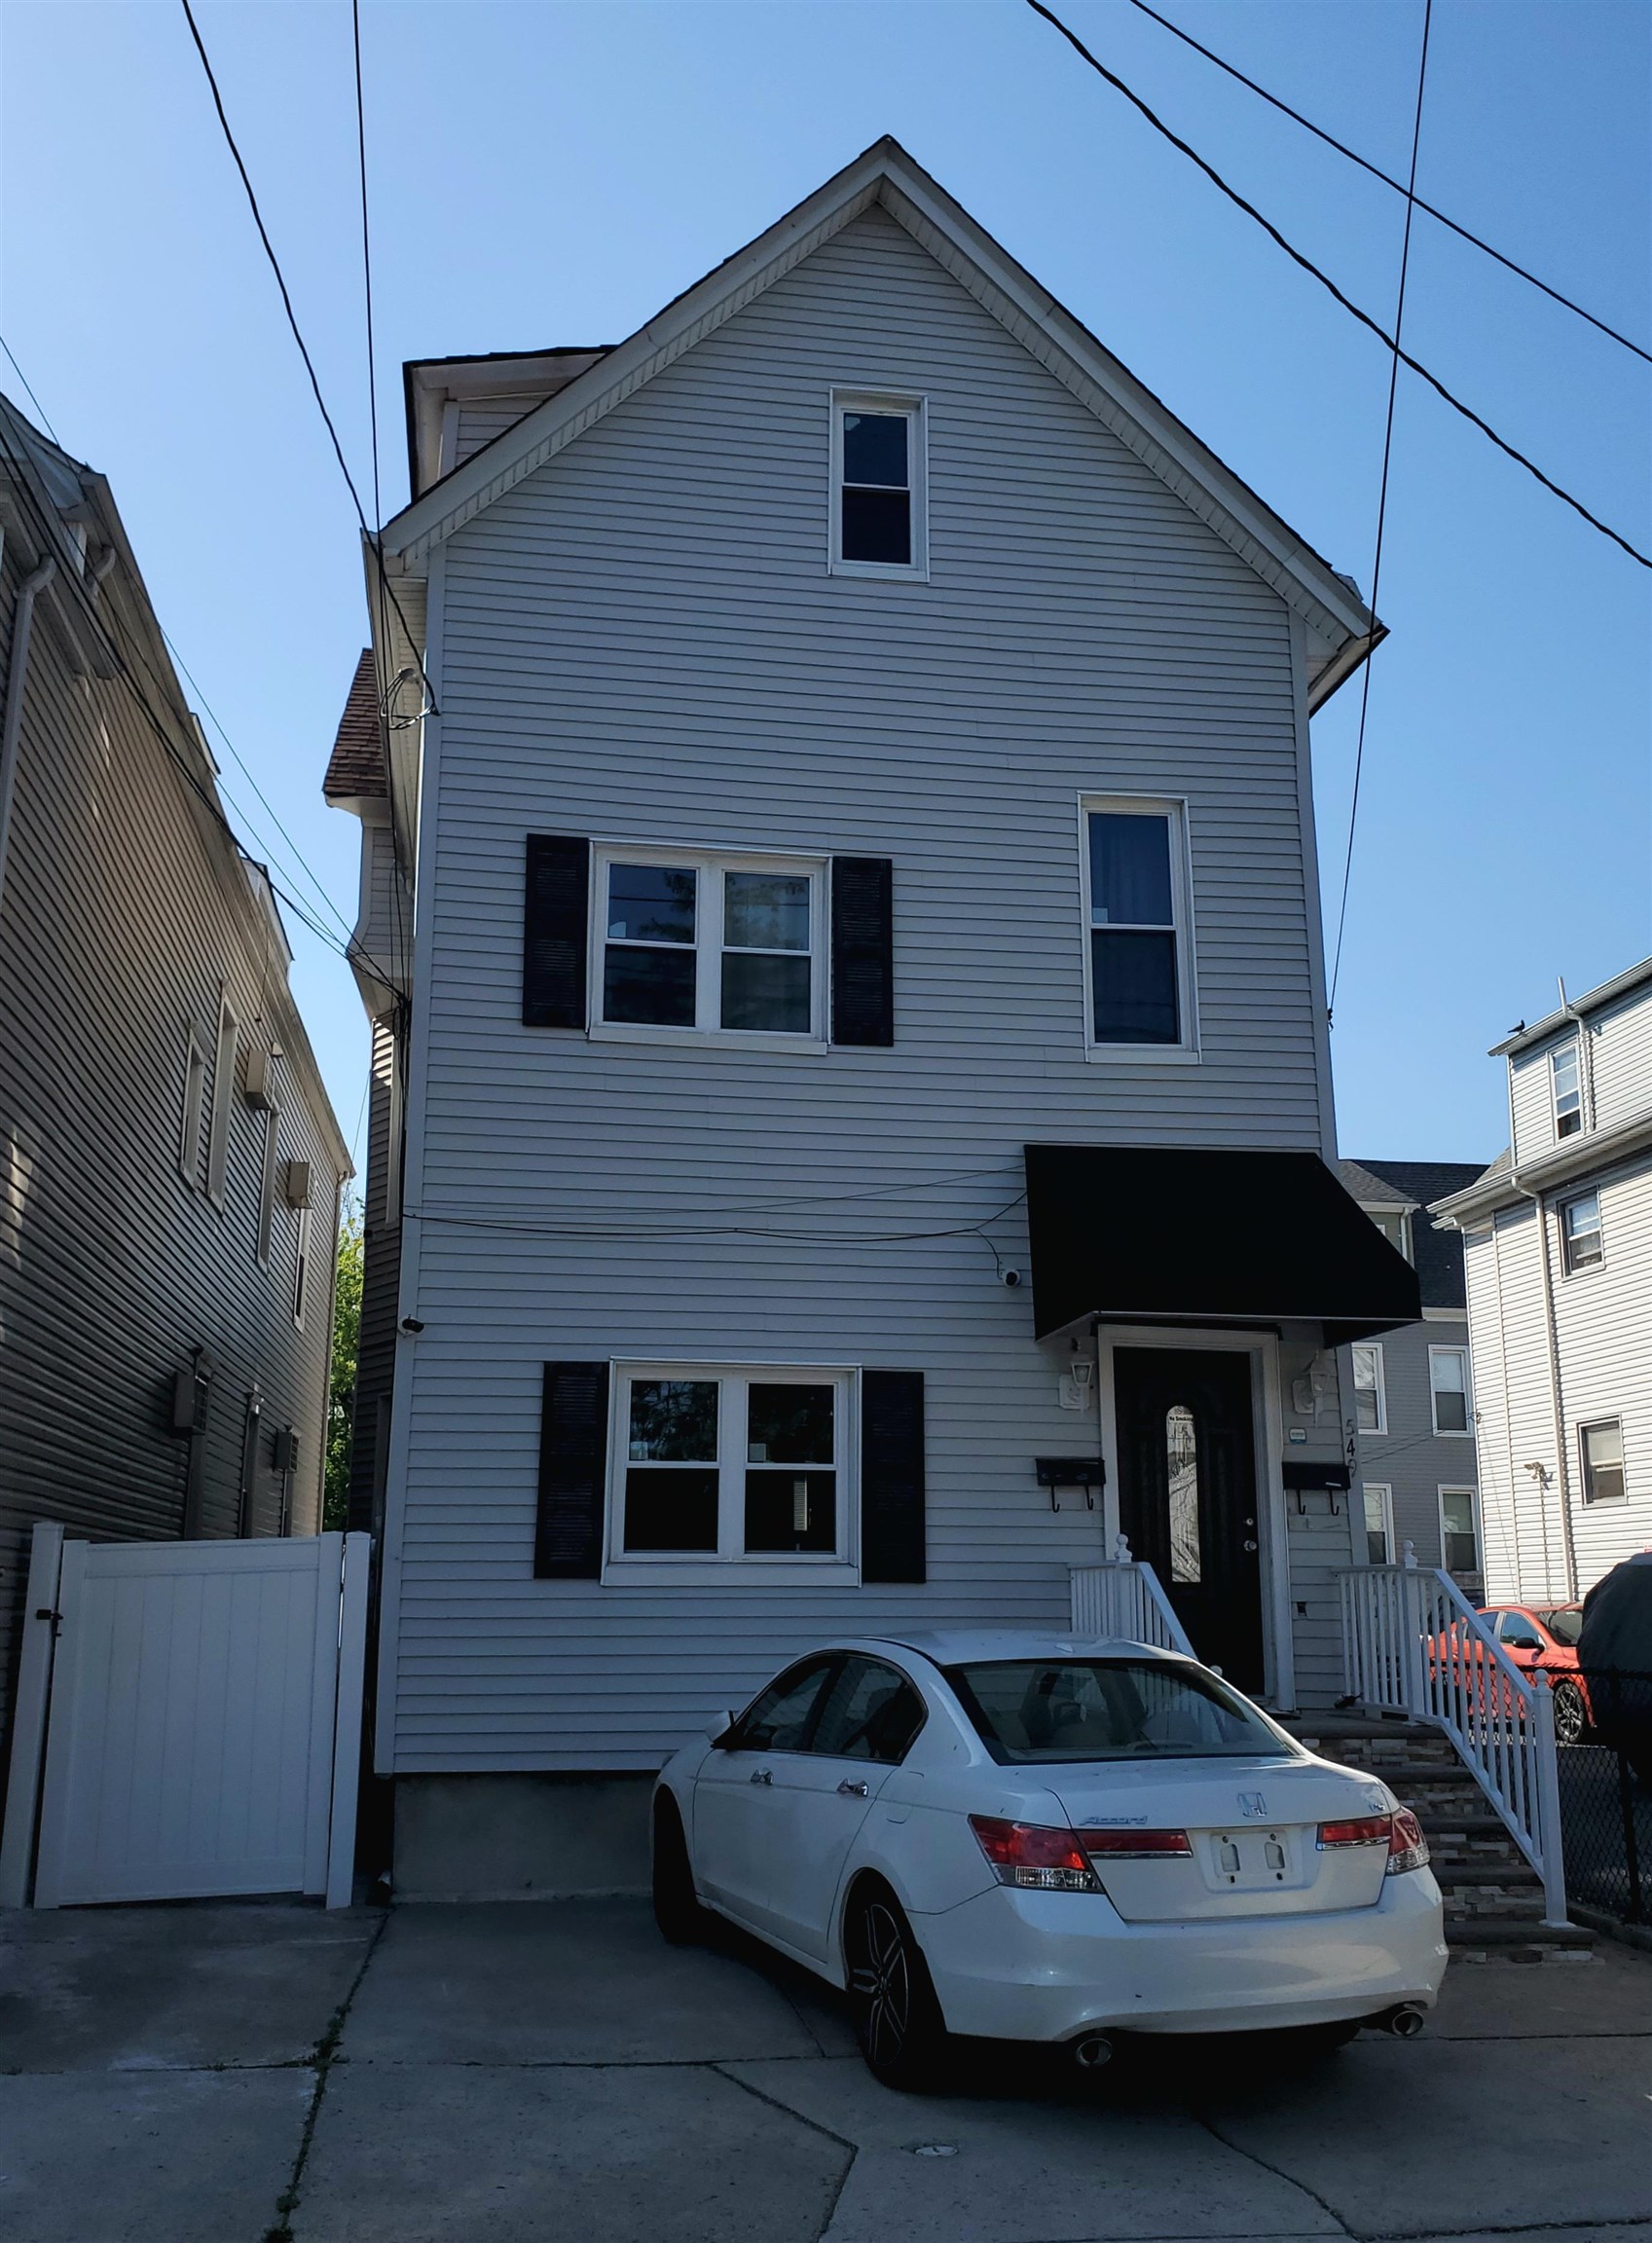 # 240009023 - For Rent in Bayonne NJ